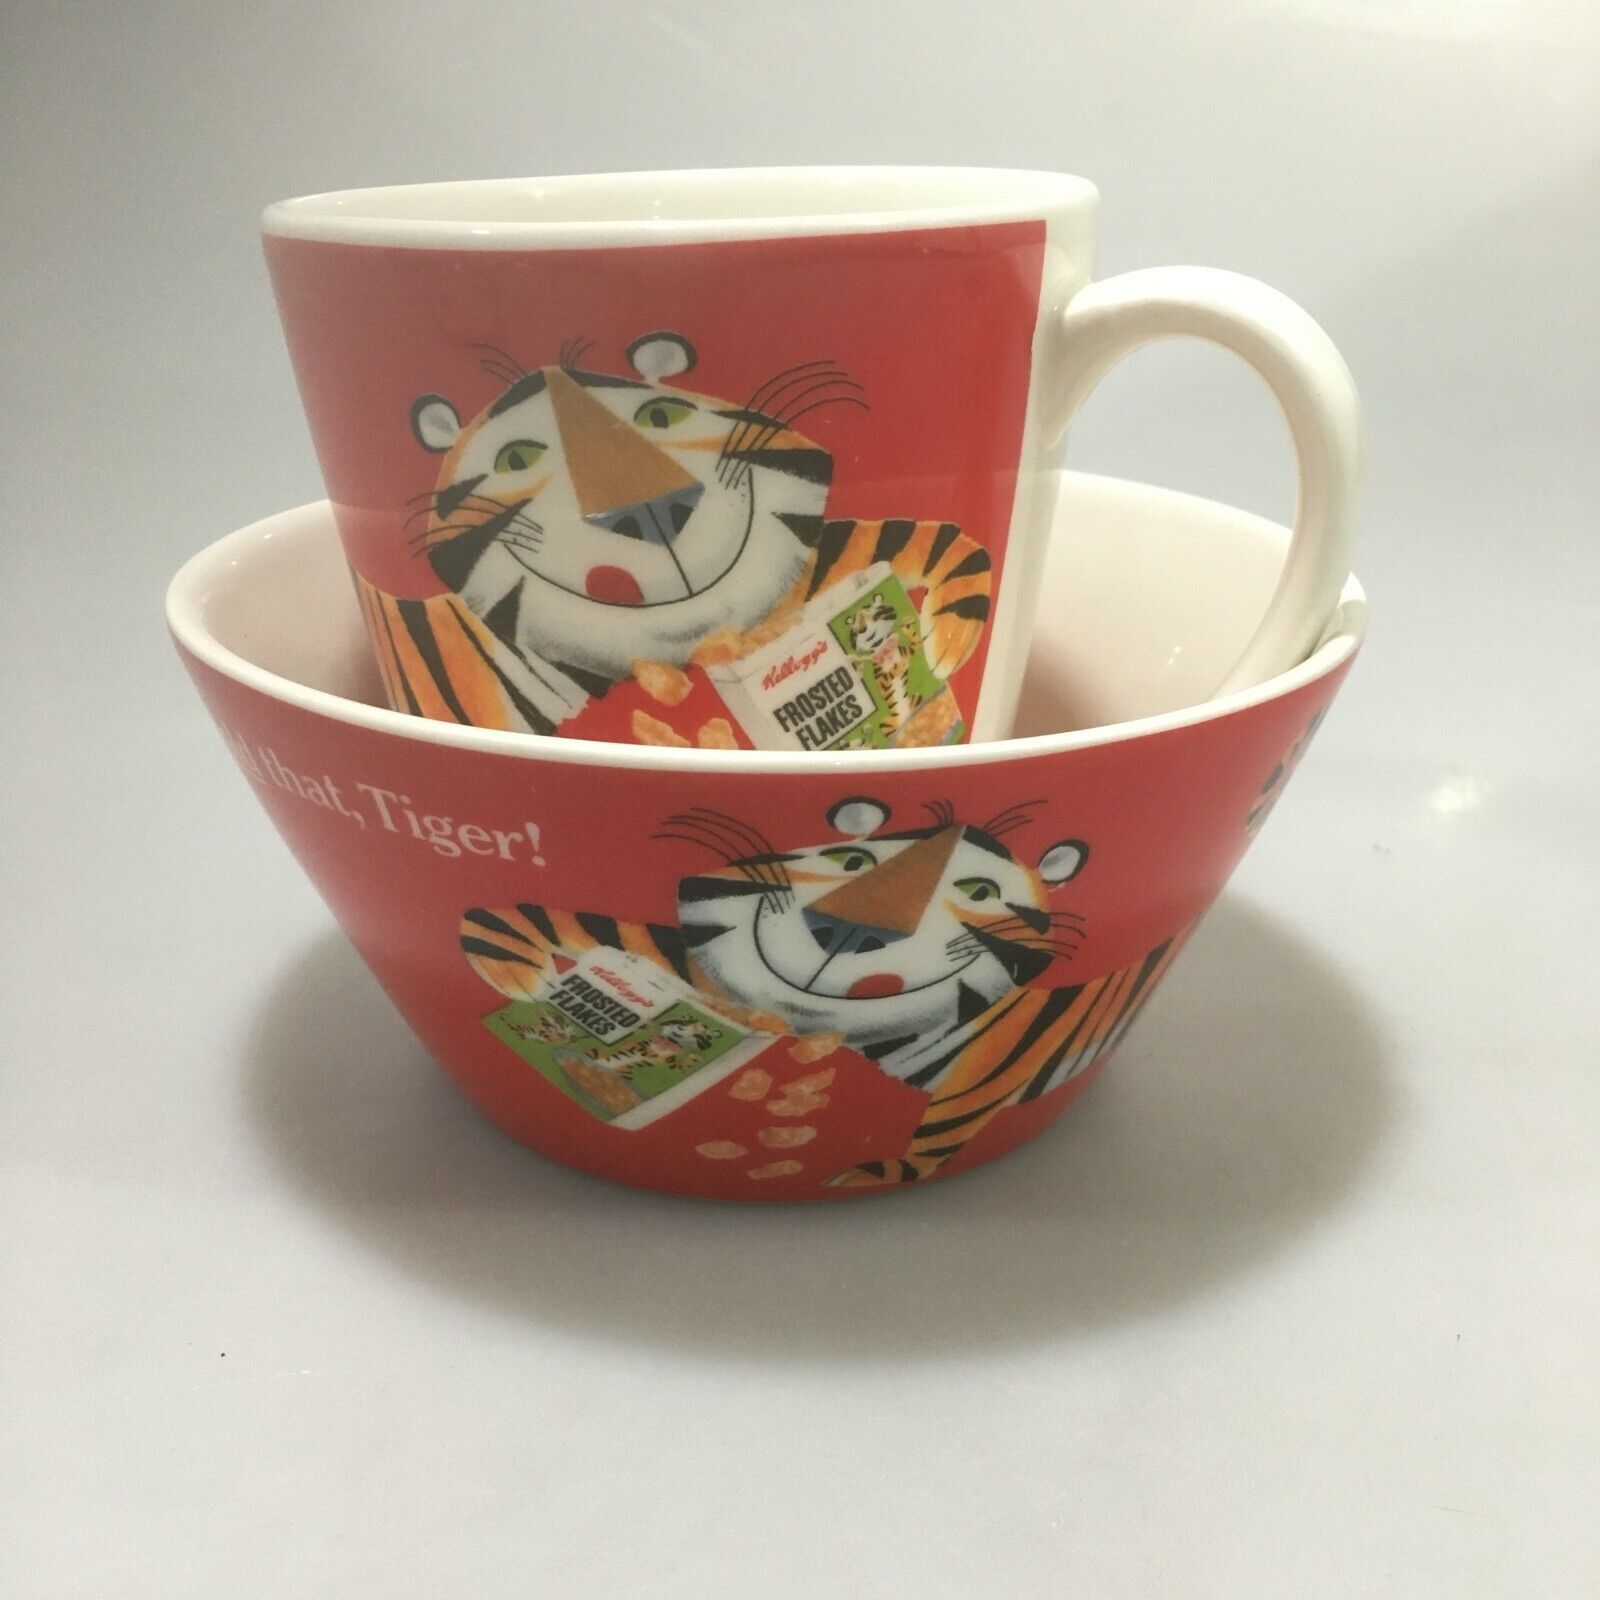 Kellogg's Hold that Tony Tiger Frosted Flakes Red Cereal Bowl & Mug Set 2006 - $35.77